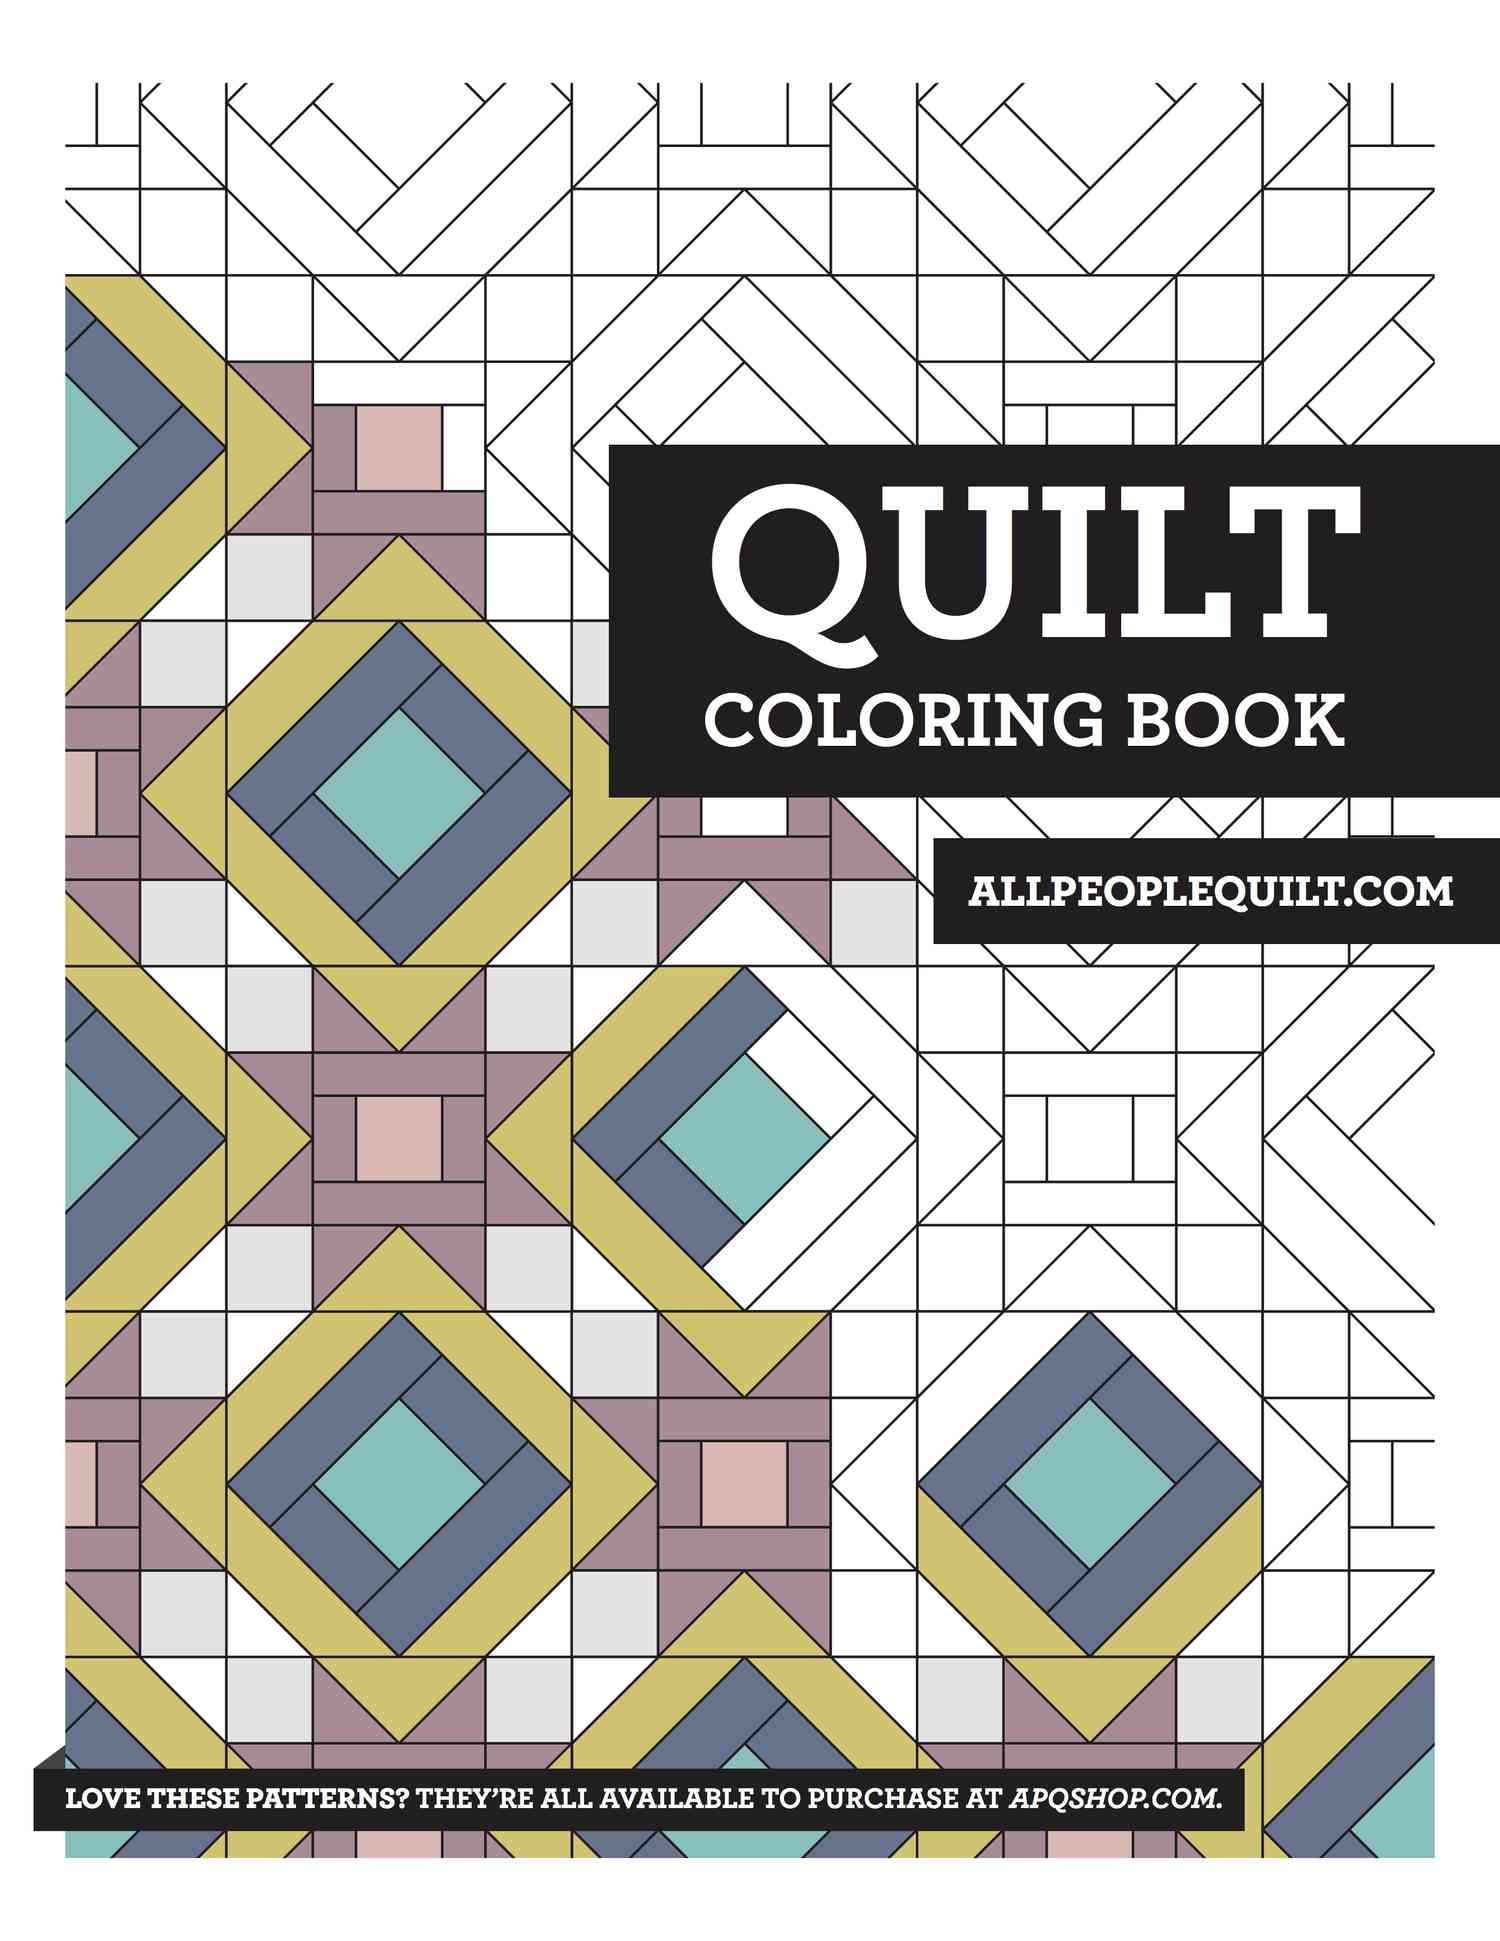 Free Quilting Coloring Books   AllPeopleQuilt.com